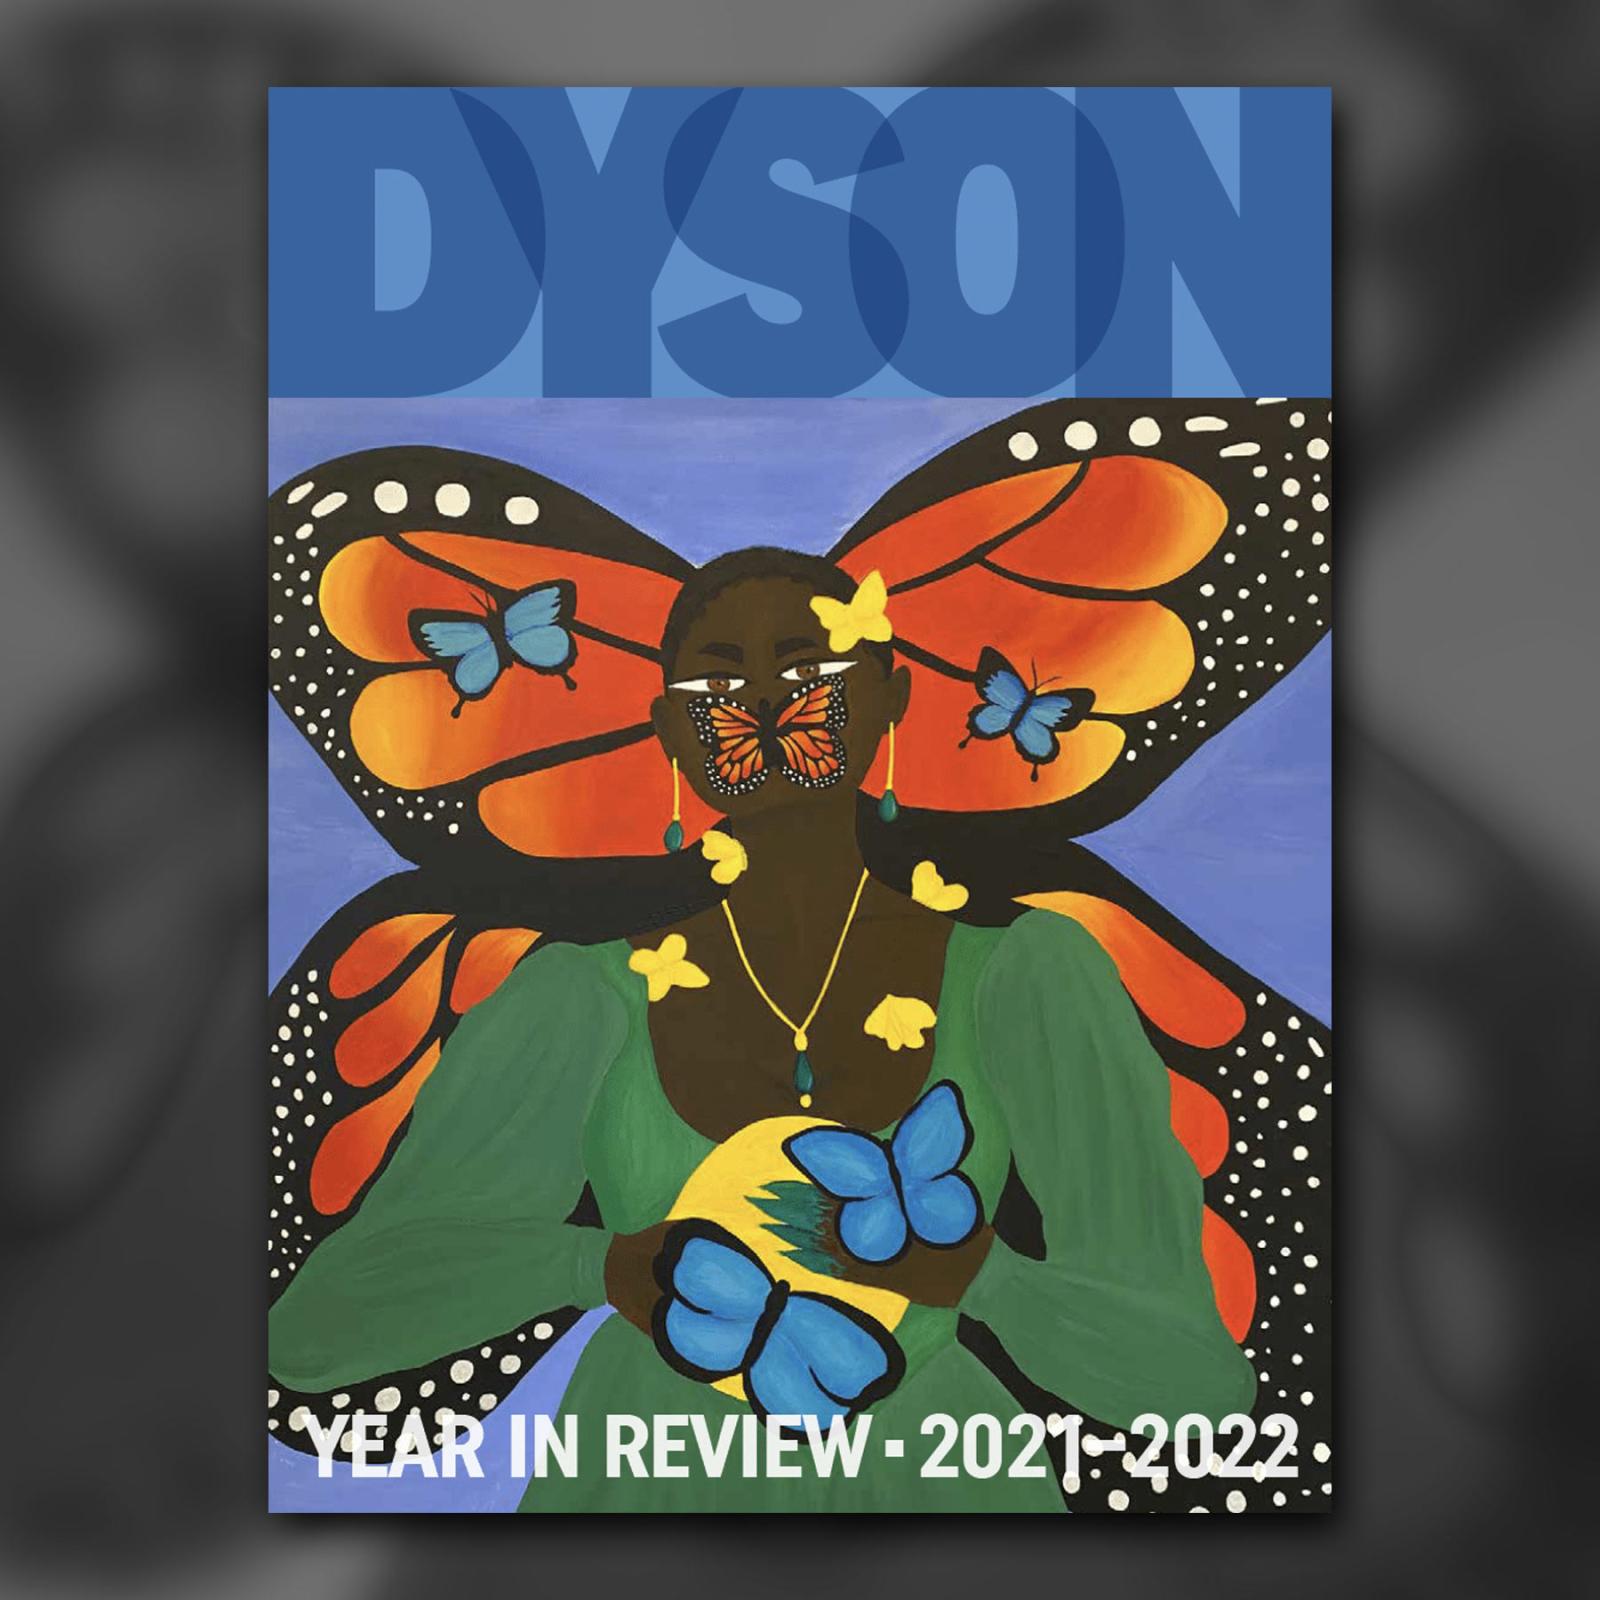 Cover of the Dyson Year in review publication from 2021-2022